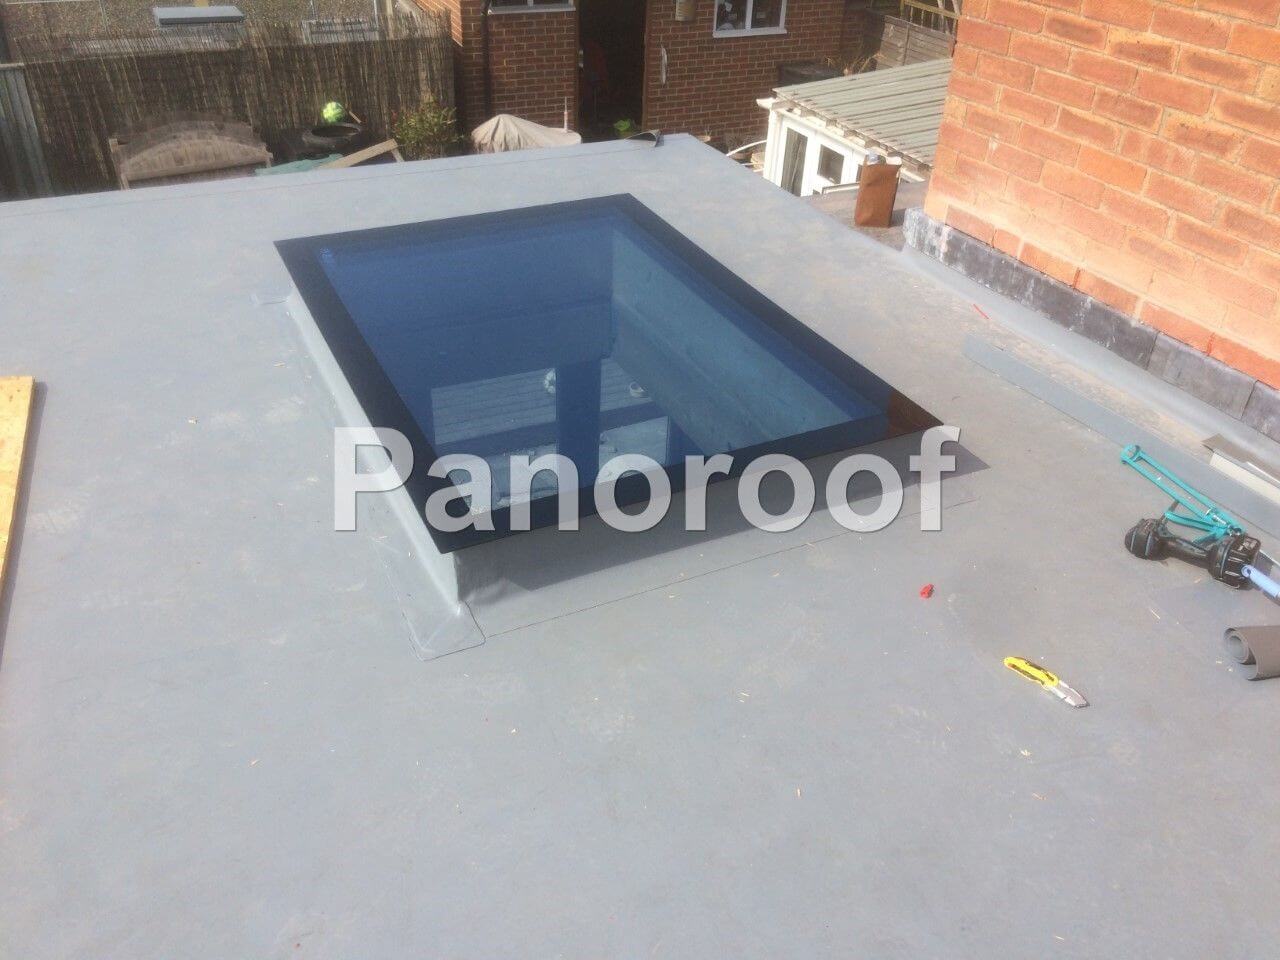 Self-Cleaning Glass Panoroof Toughened Triple-Glazed Skylight Flat Roof Lantern Rooflight 500mm x 1200mm